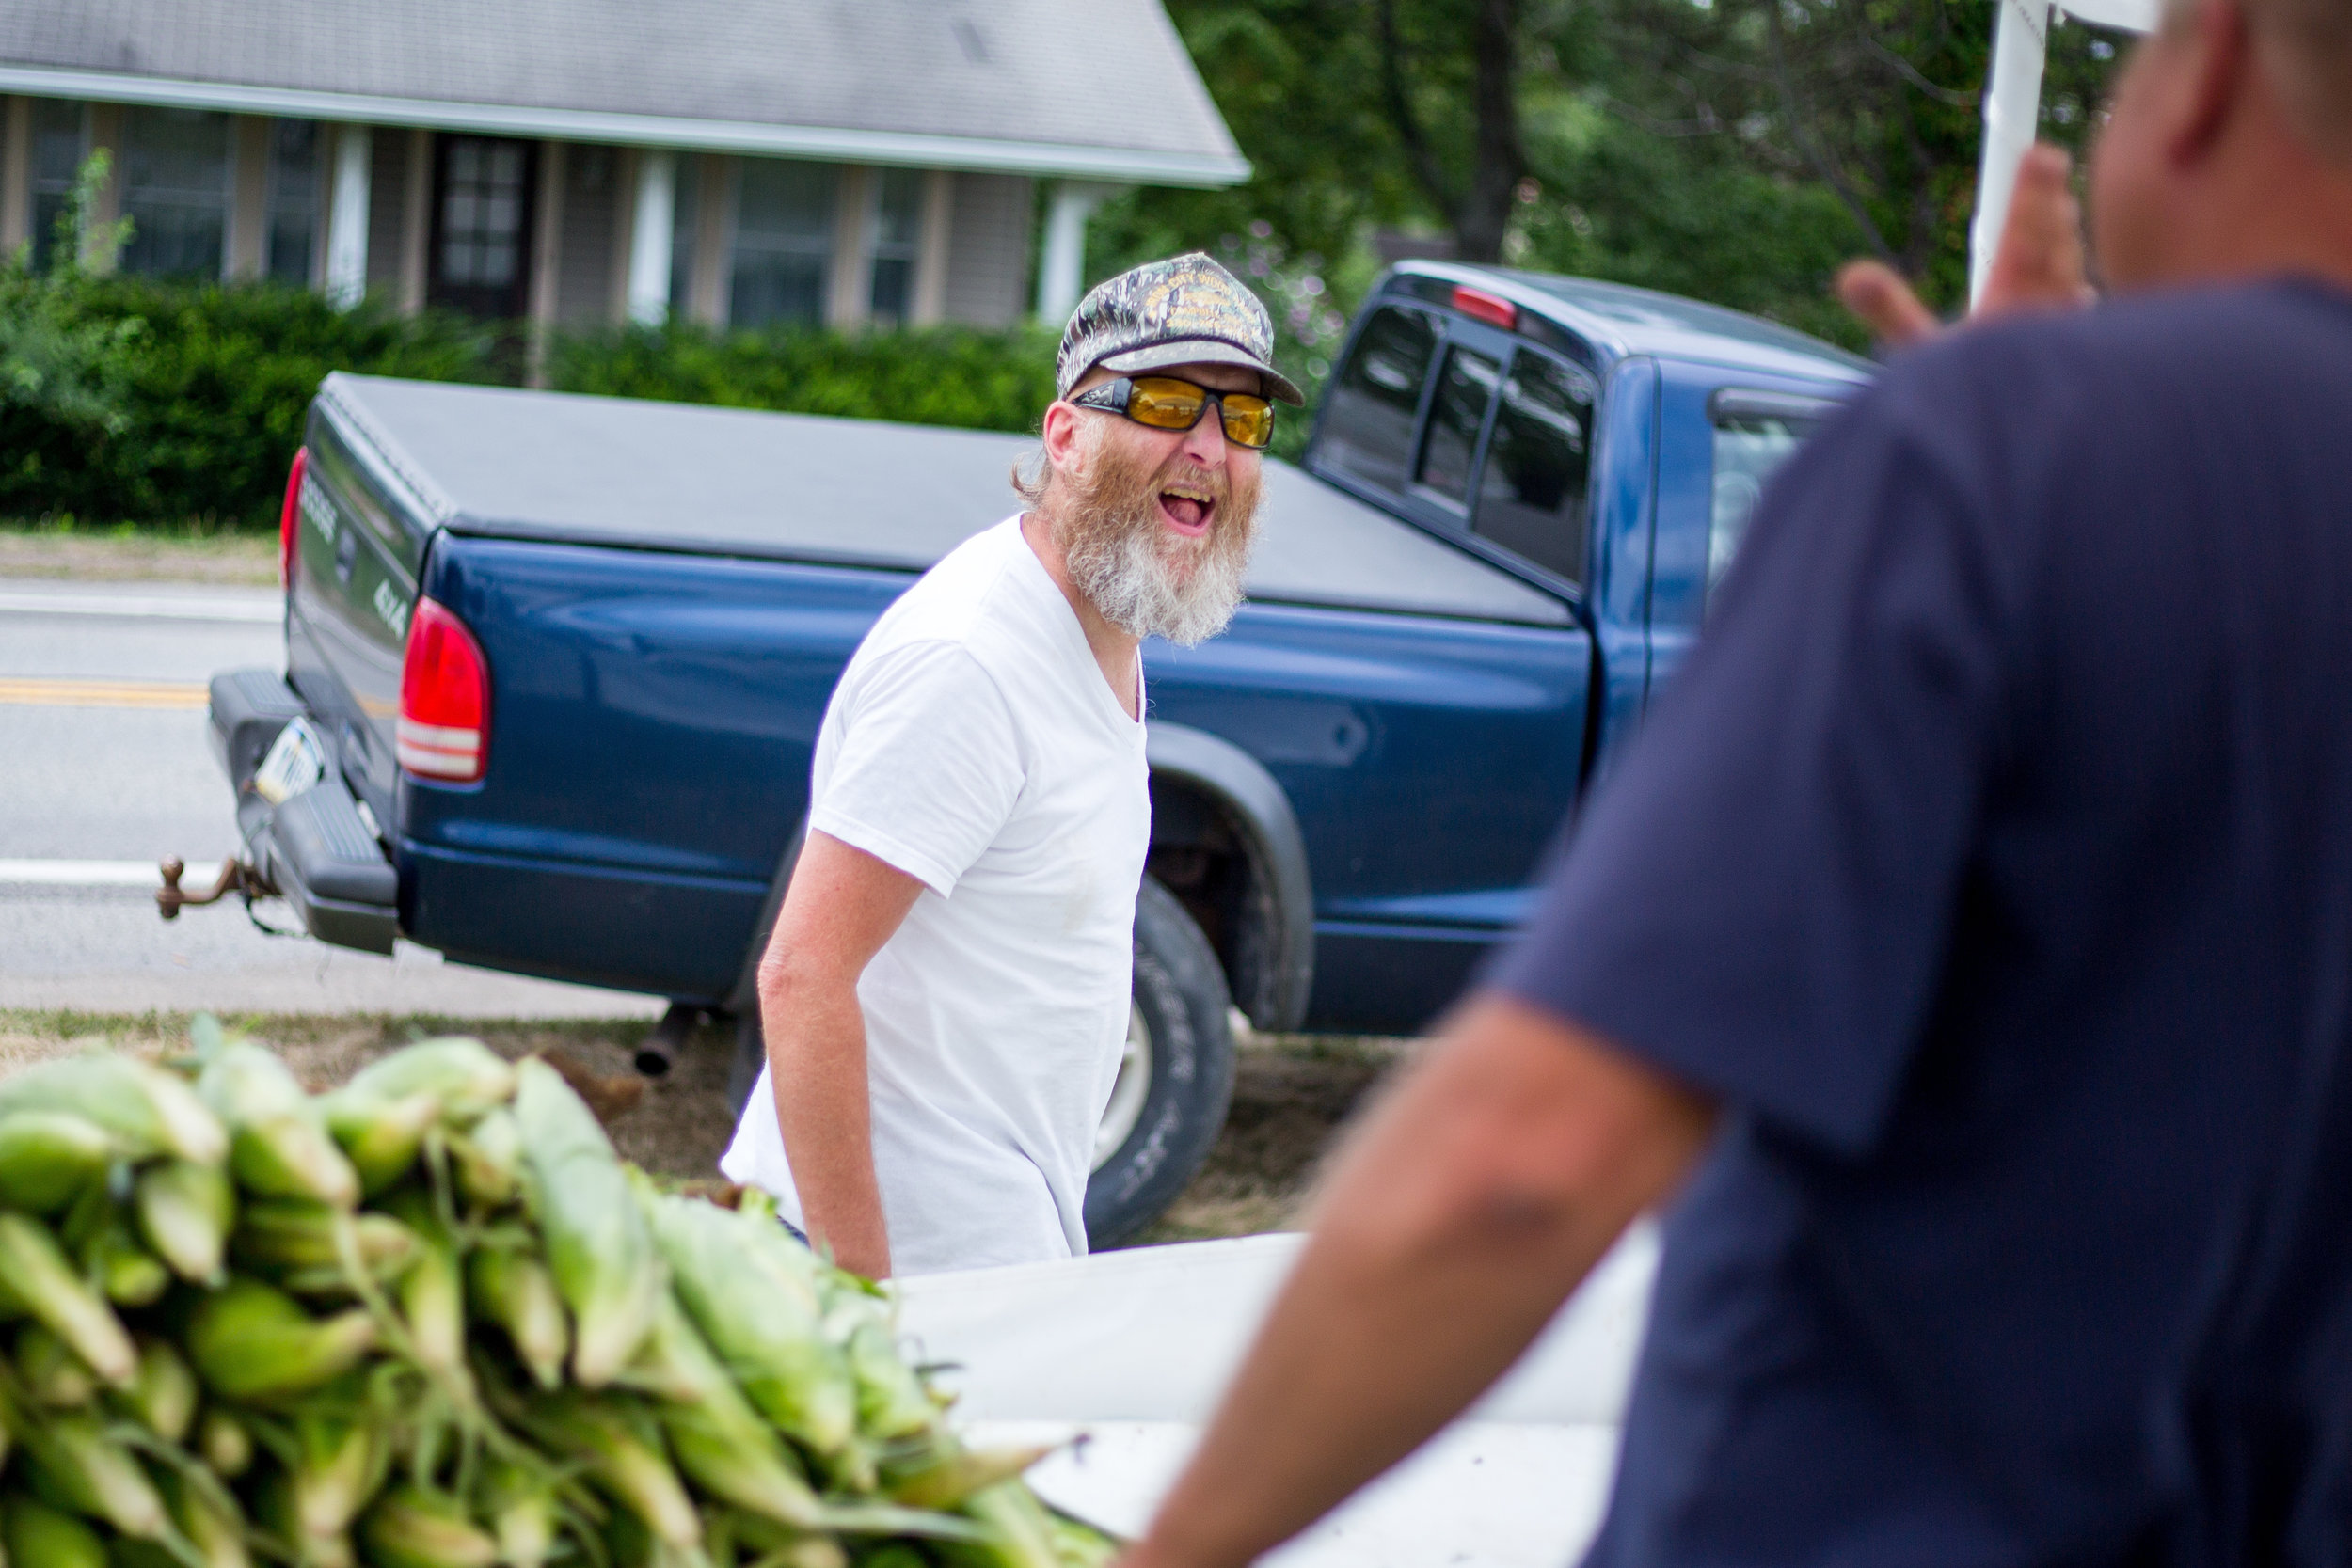  Doug Aiken, left, laughs after getting corn from Mike Wise at his produce stand on Highway 65 in North Sewickley on Tuesday afternoon.  